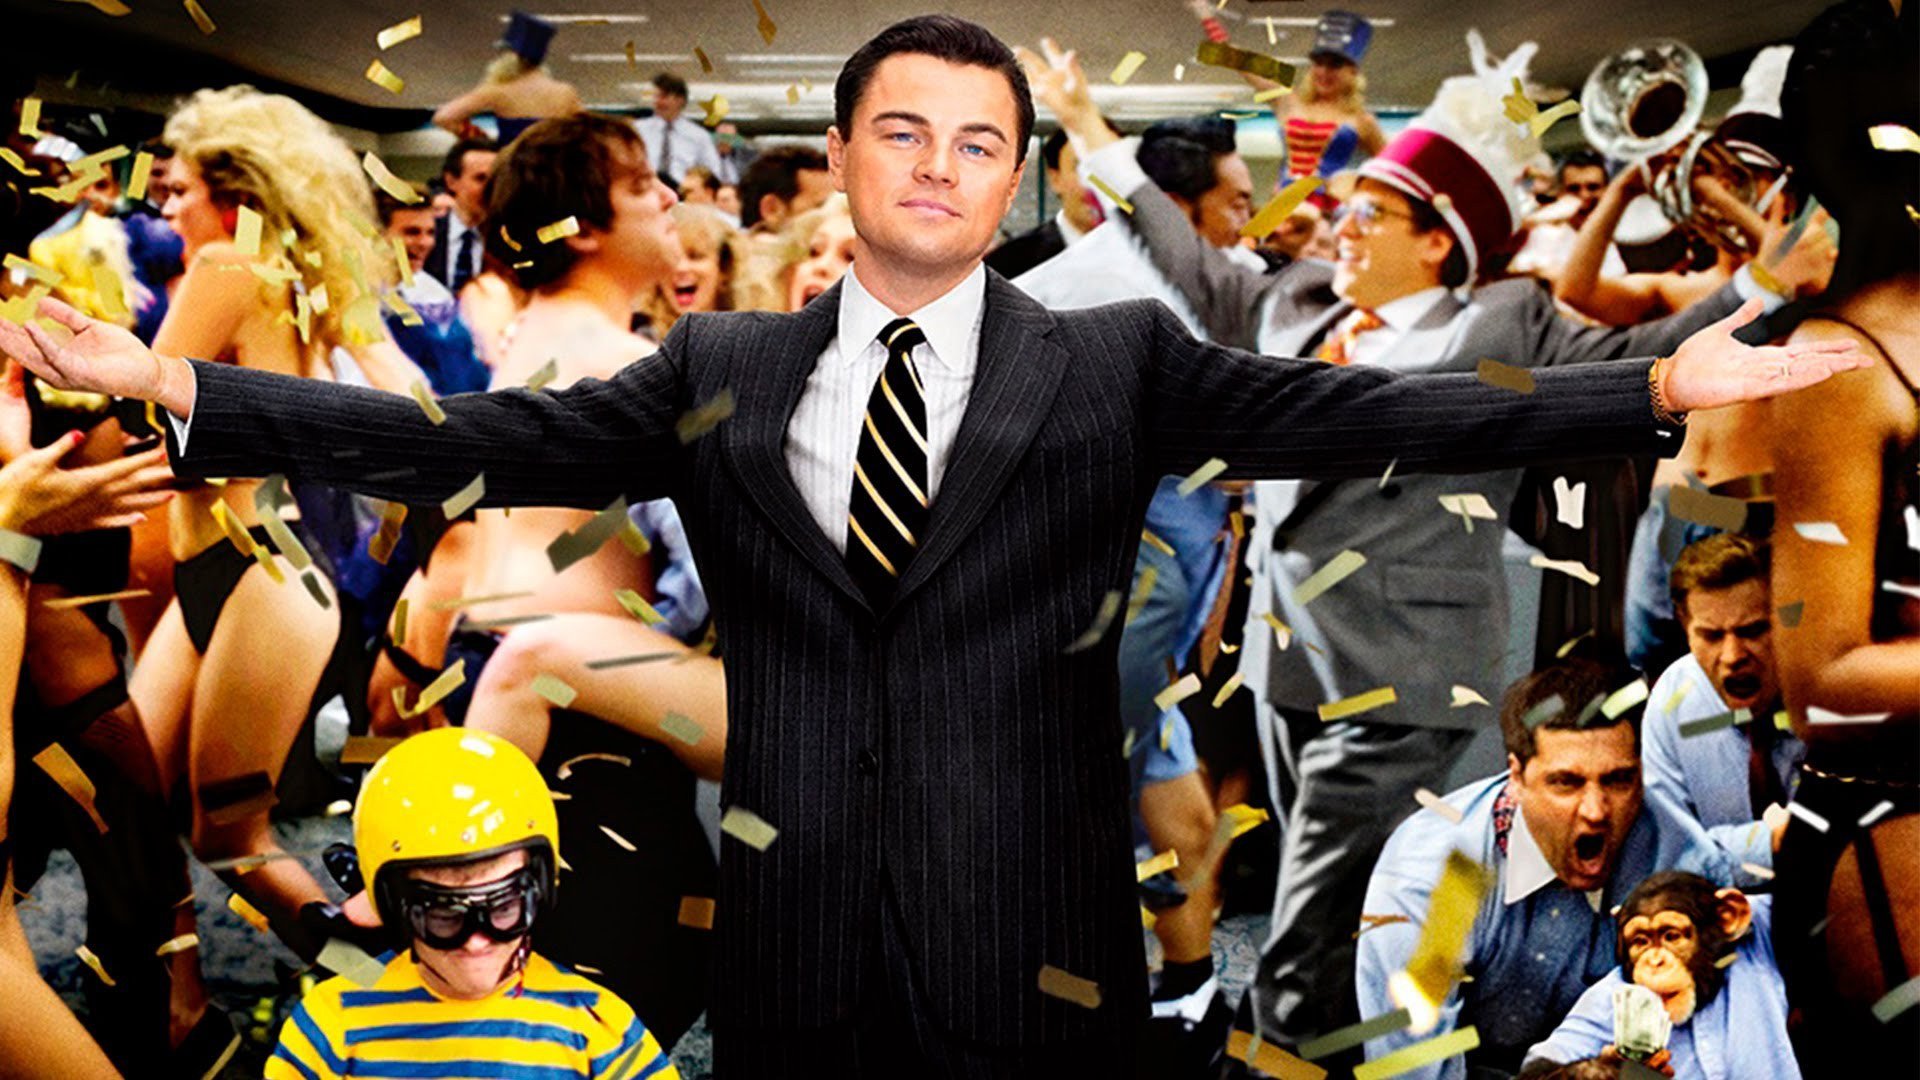 What Can Sales Leaders Learn from the Wolf of Wall Street?